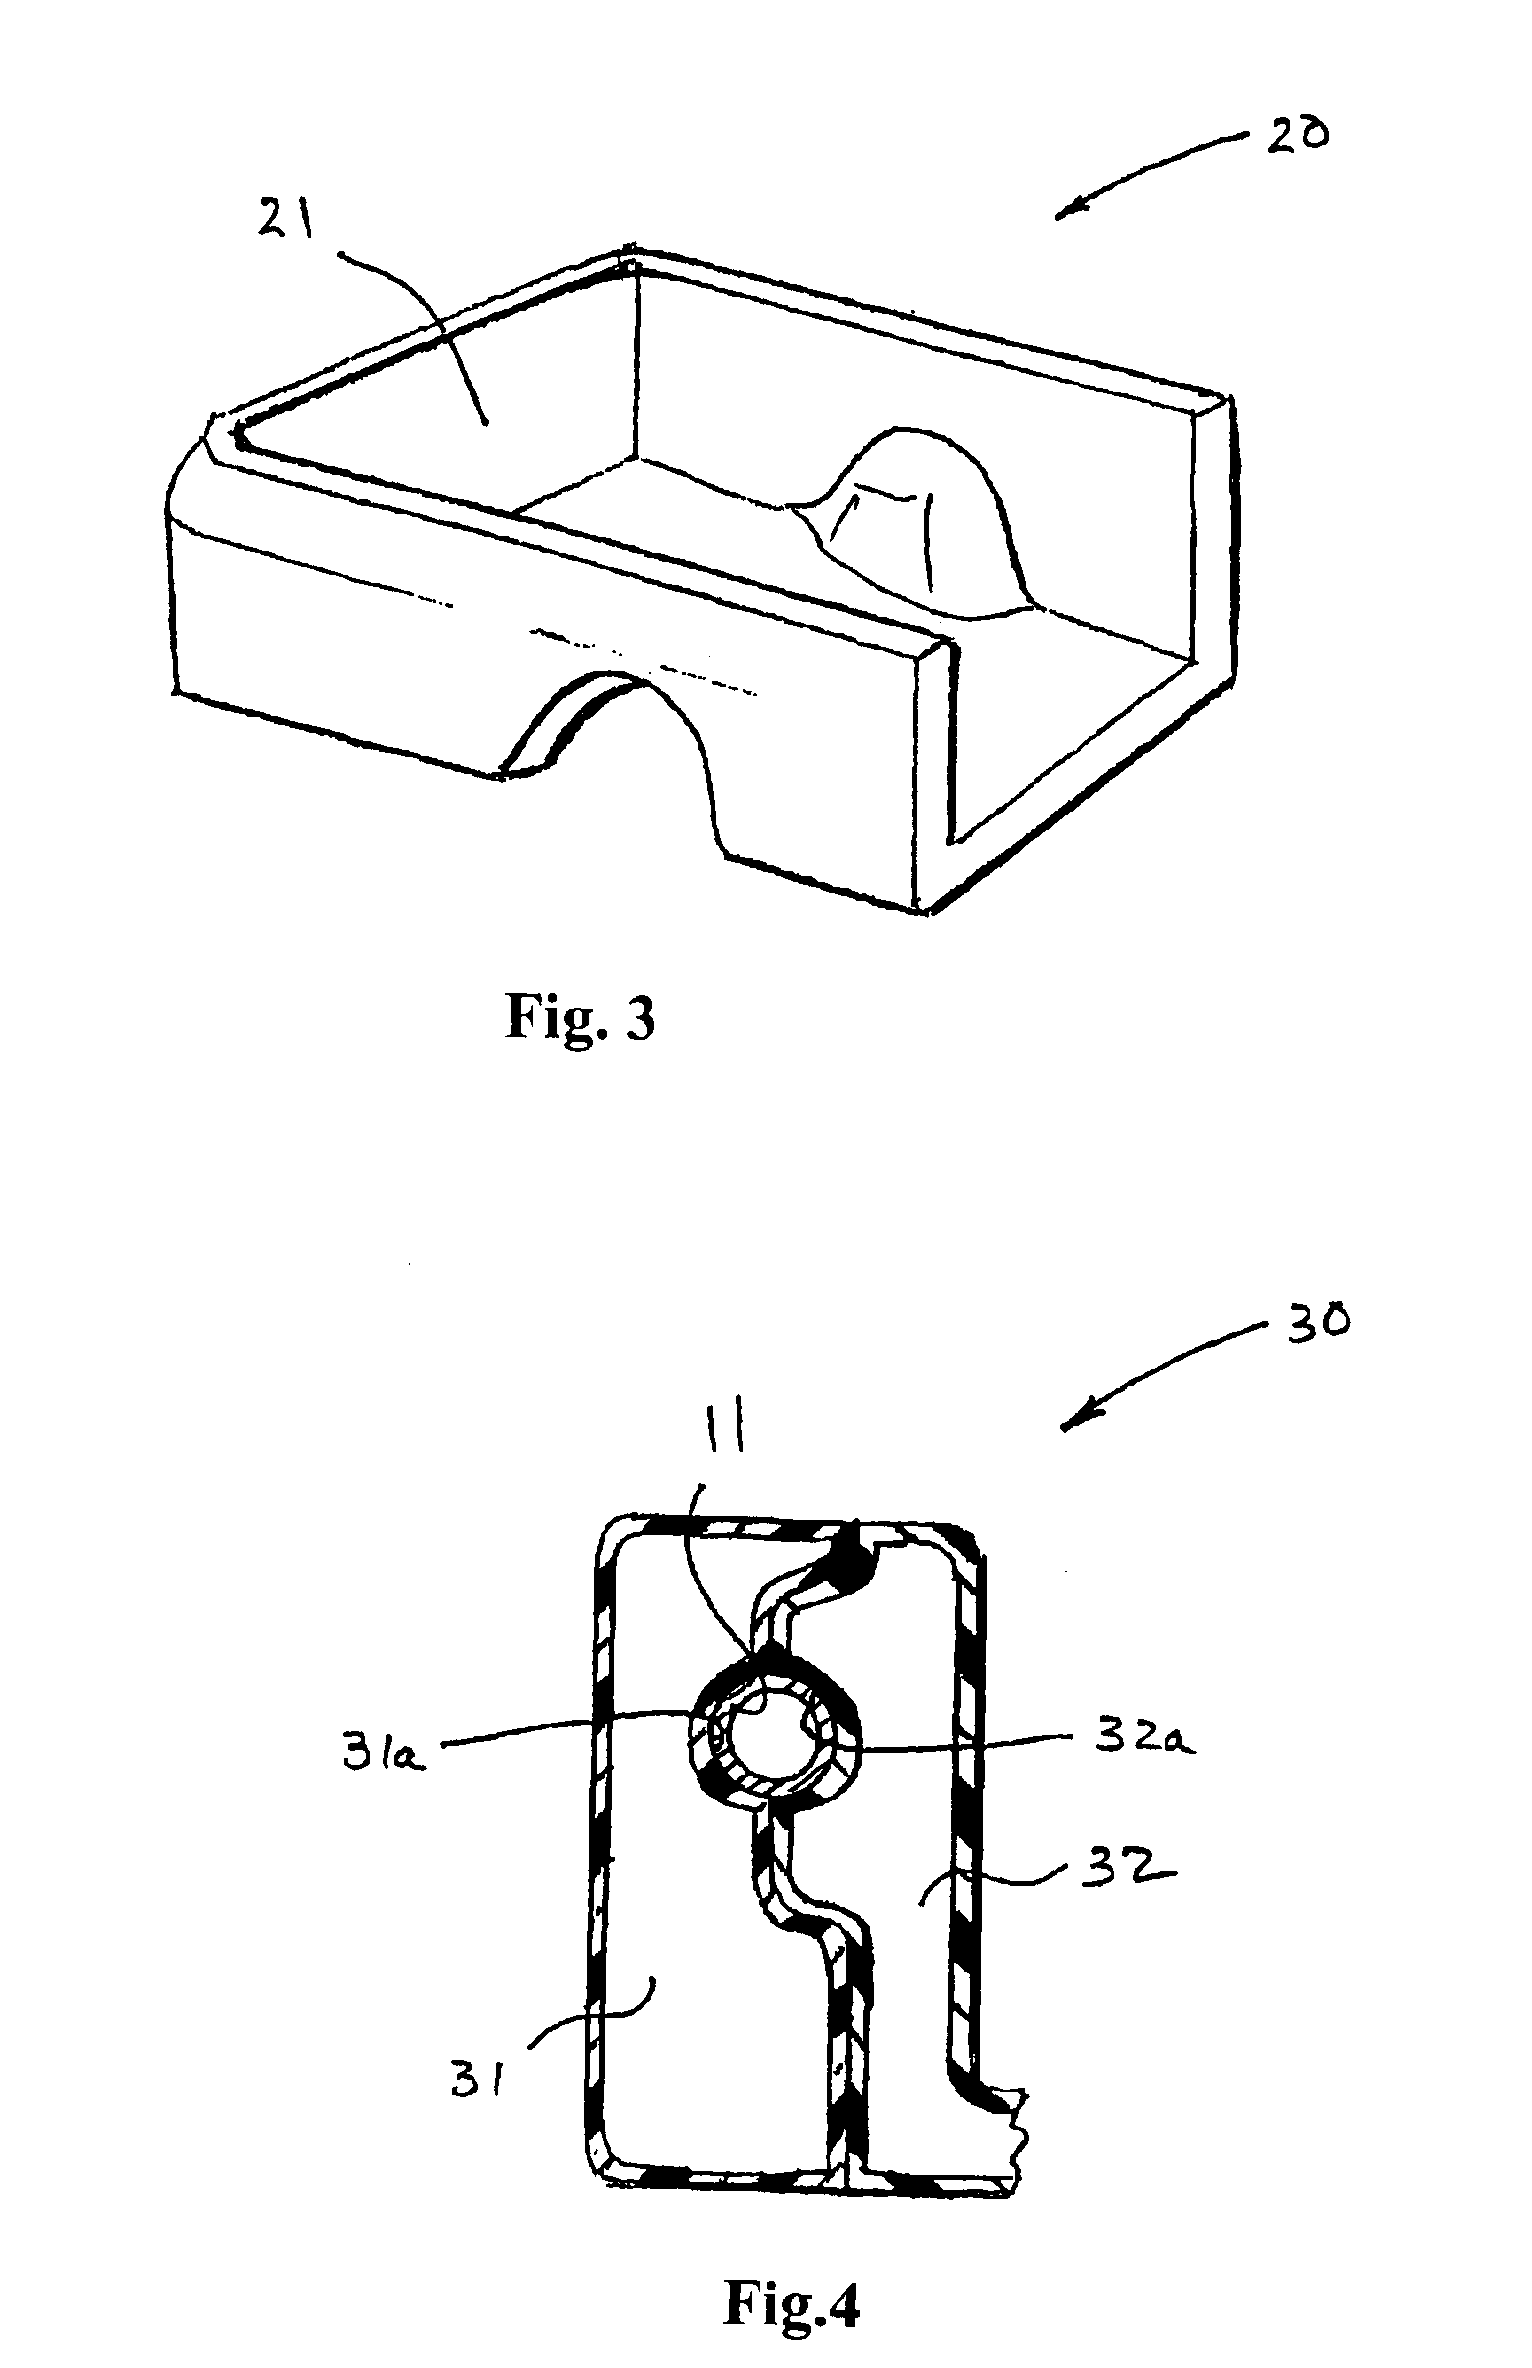 Storage box for a pickup truck formed from metallic and composite materials